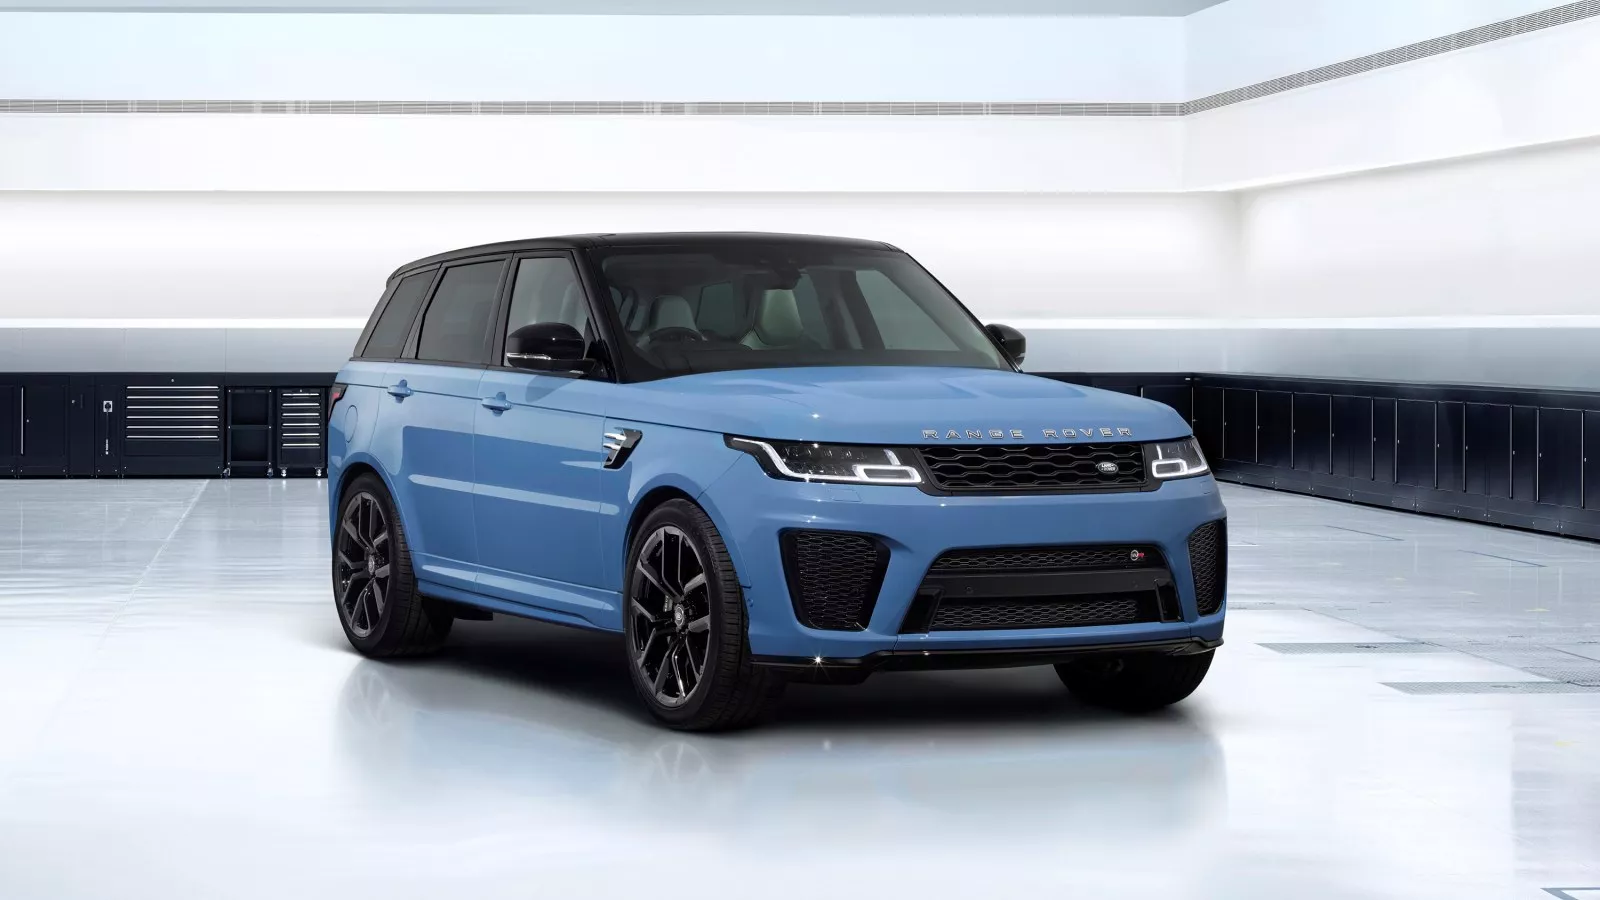 575-hp-range-rover-sport-svr-ultimae-is-the-fastest-most-powerful-suv-land-rover-sells